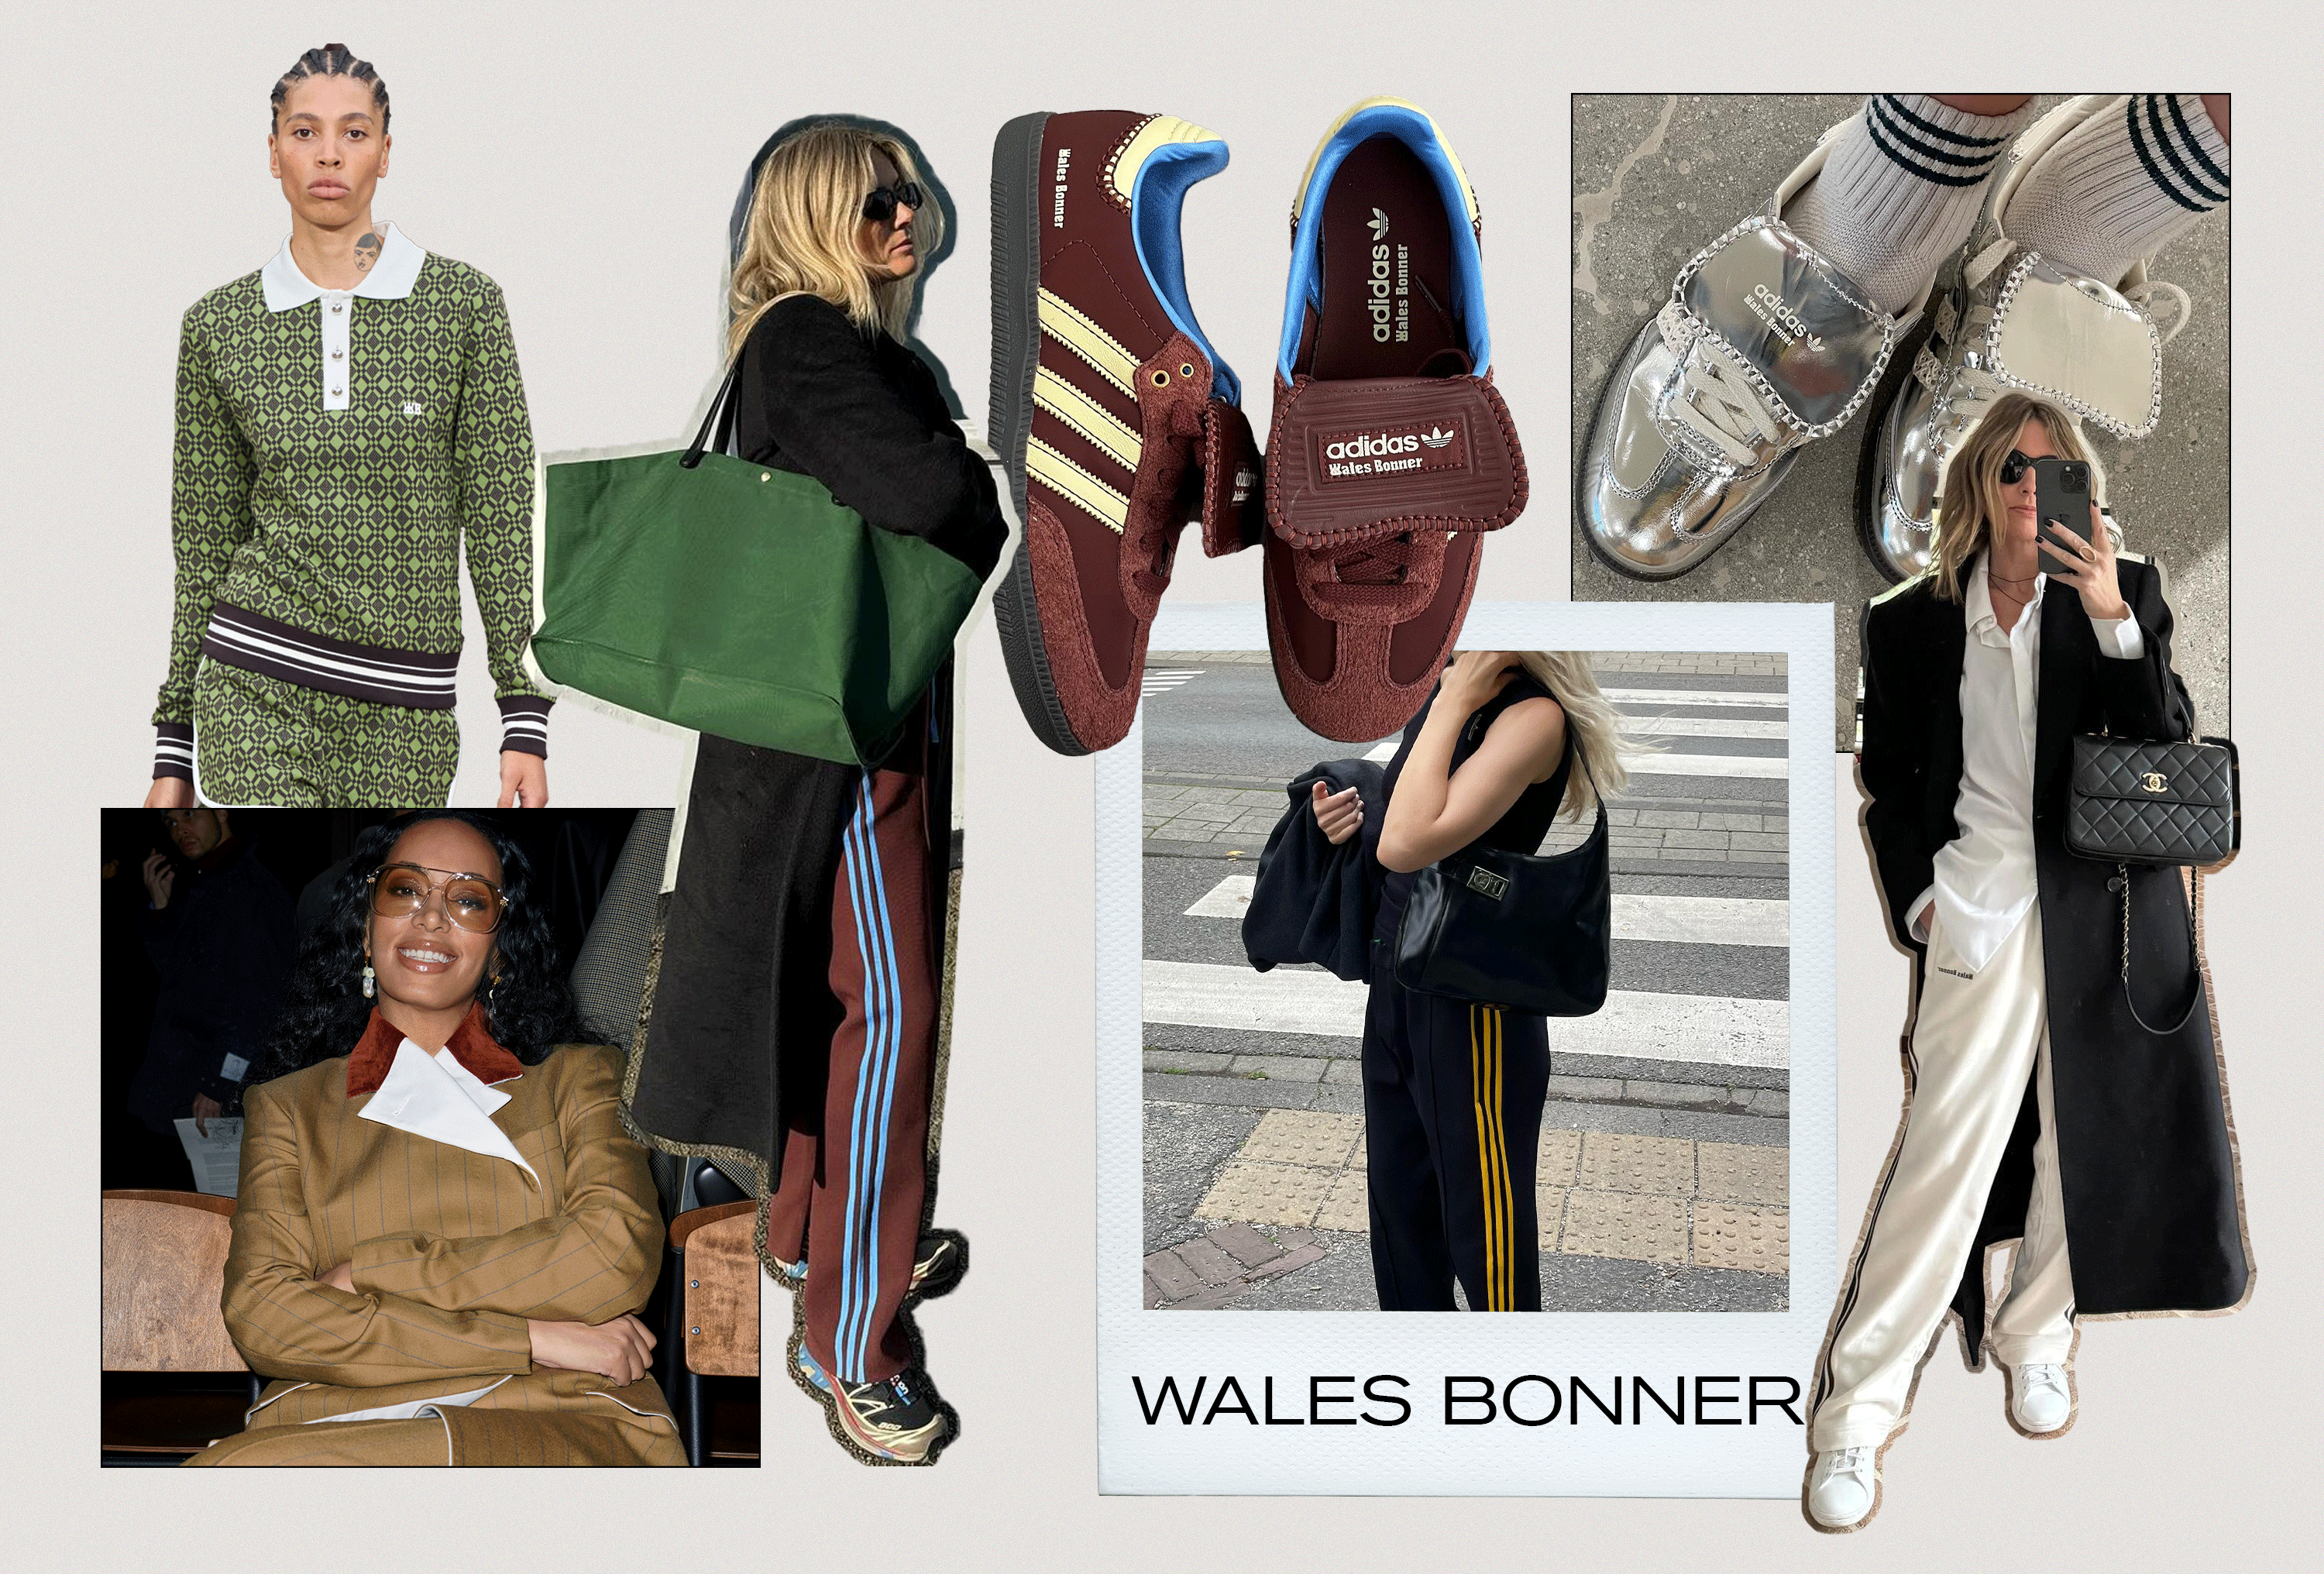 Solange Knowles and influencers wear pieces from Wales Bonner